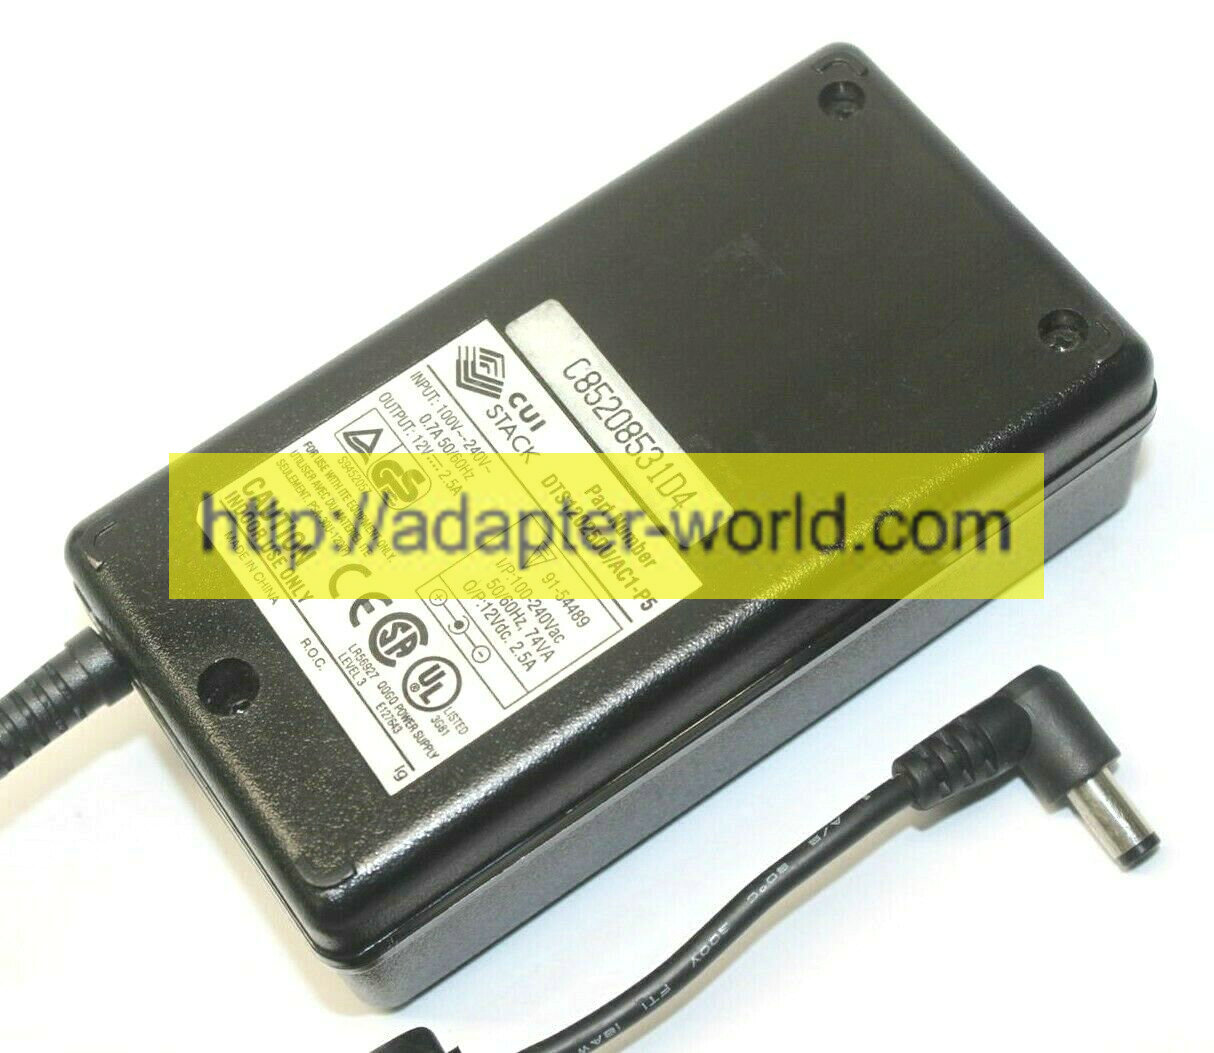 *100% Brand NEW* 12V 2.5A CUI Stack DTS120250U/AC1-P5 POWER SUPPLY AC ADAPTER